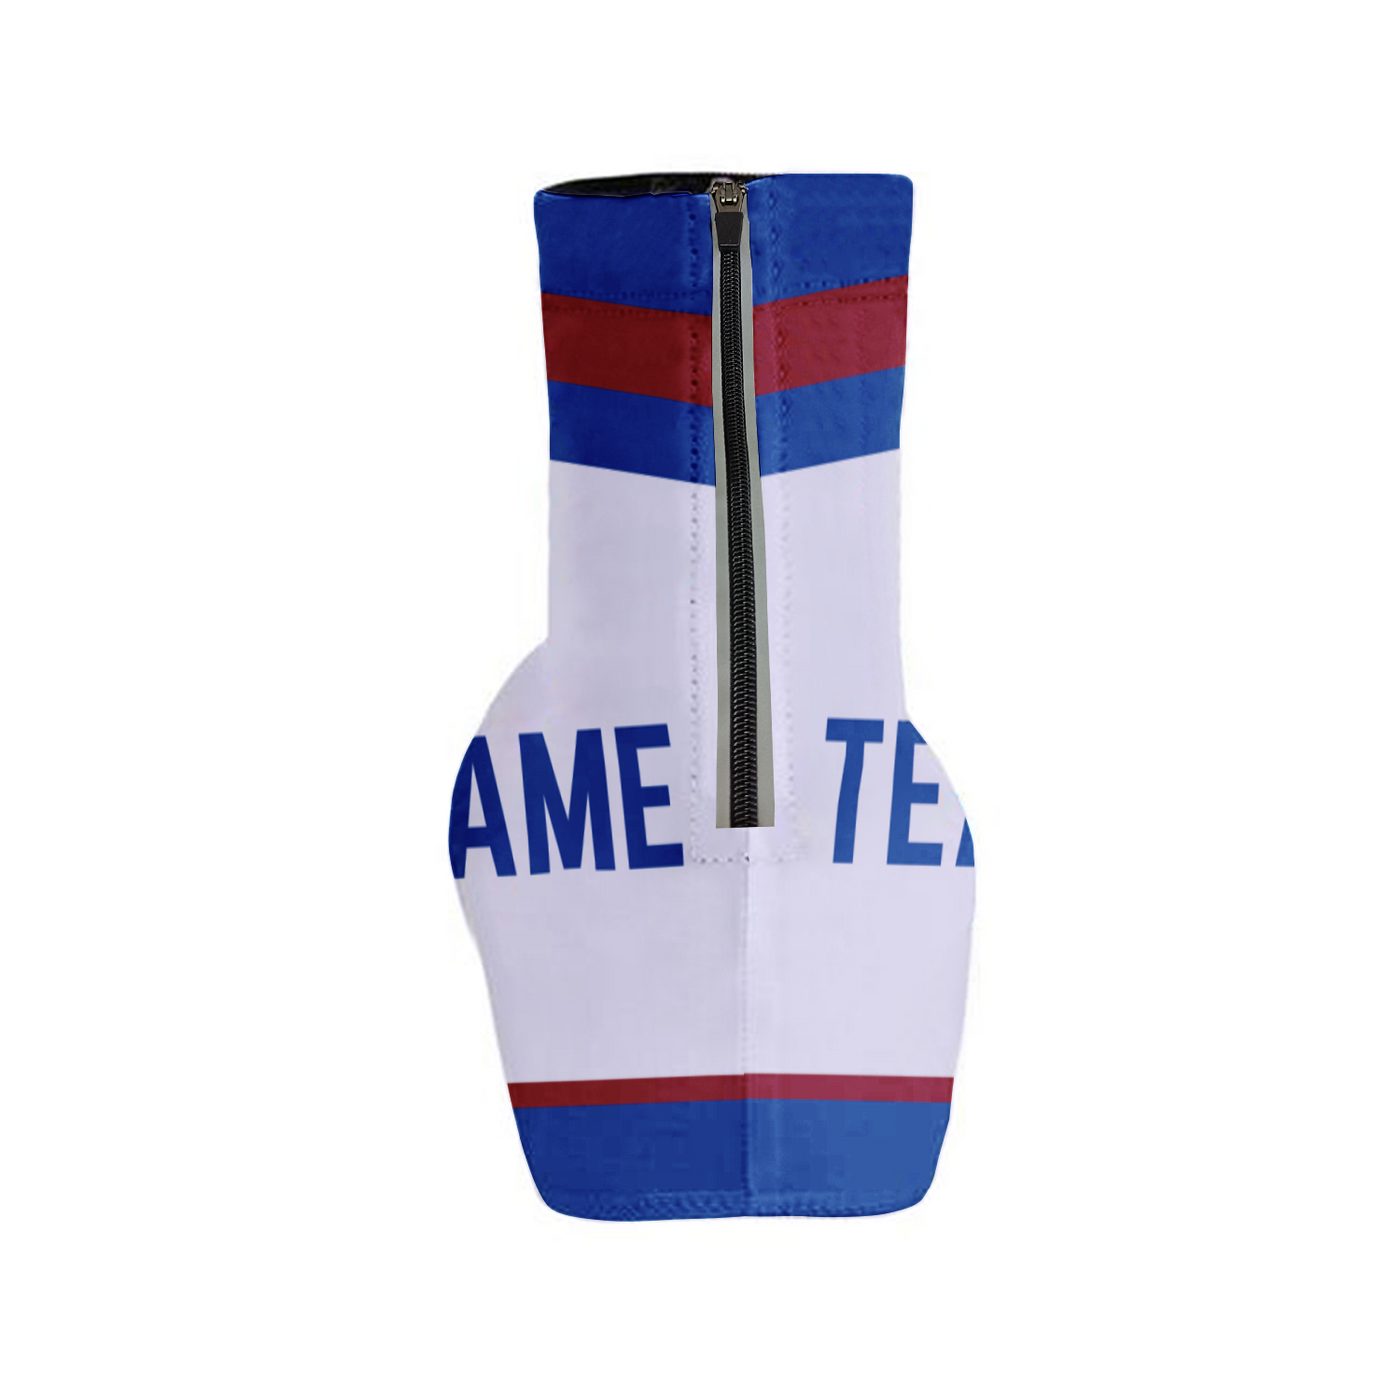 Customized New York Cycling Shoe Covers